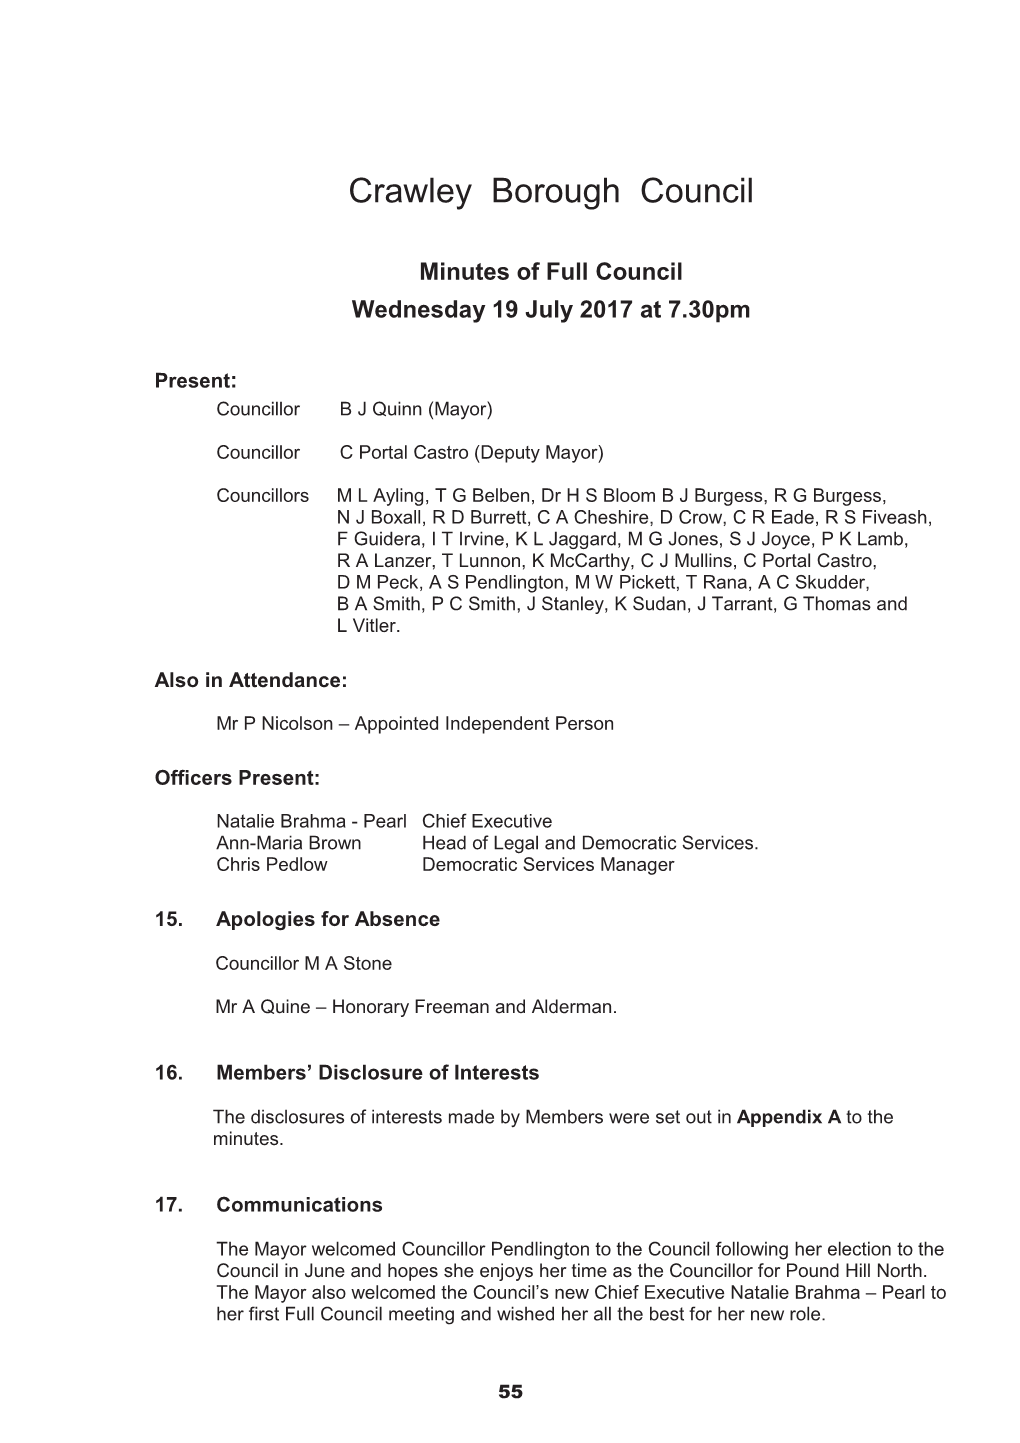 Full Council Minutres from 19 July 2017